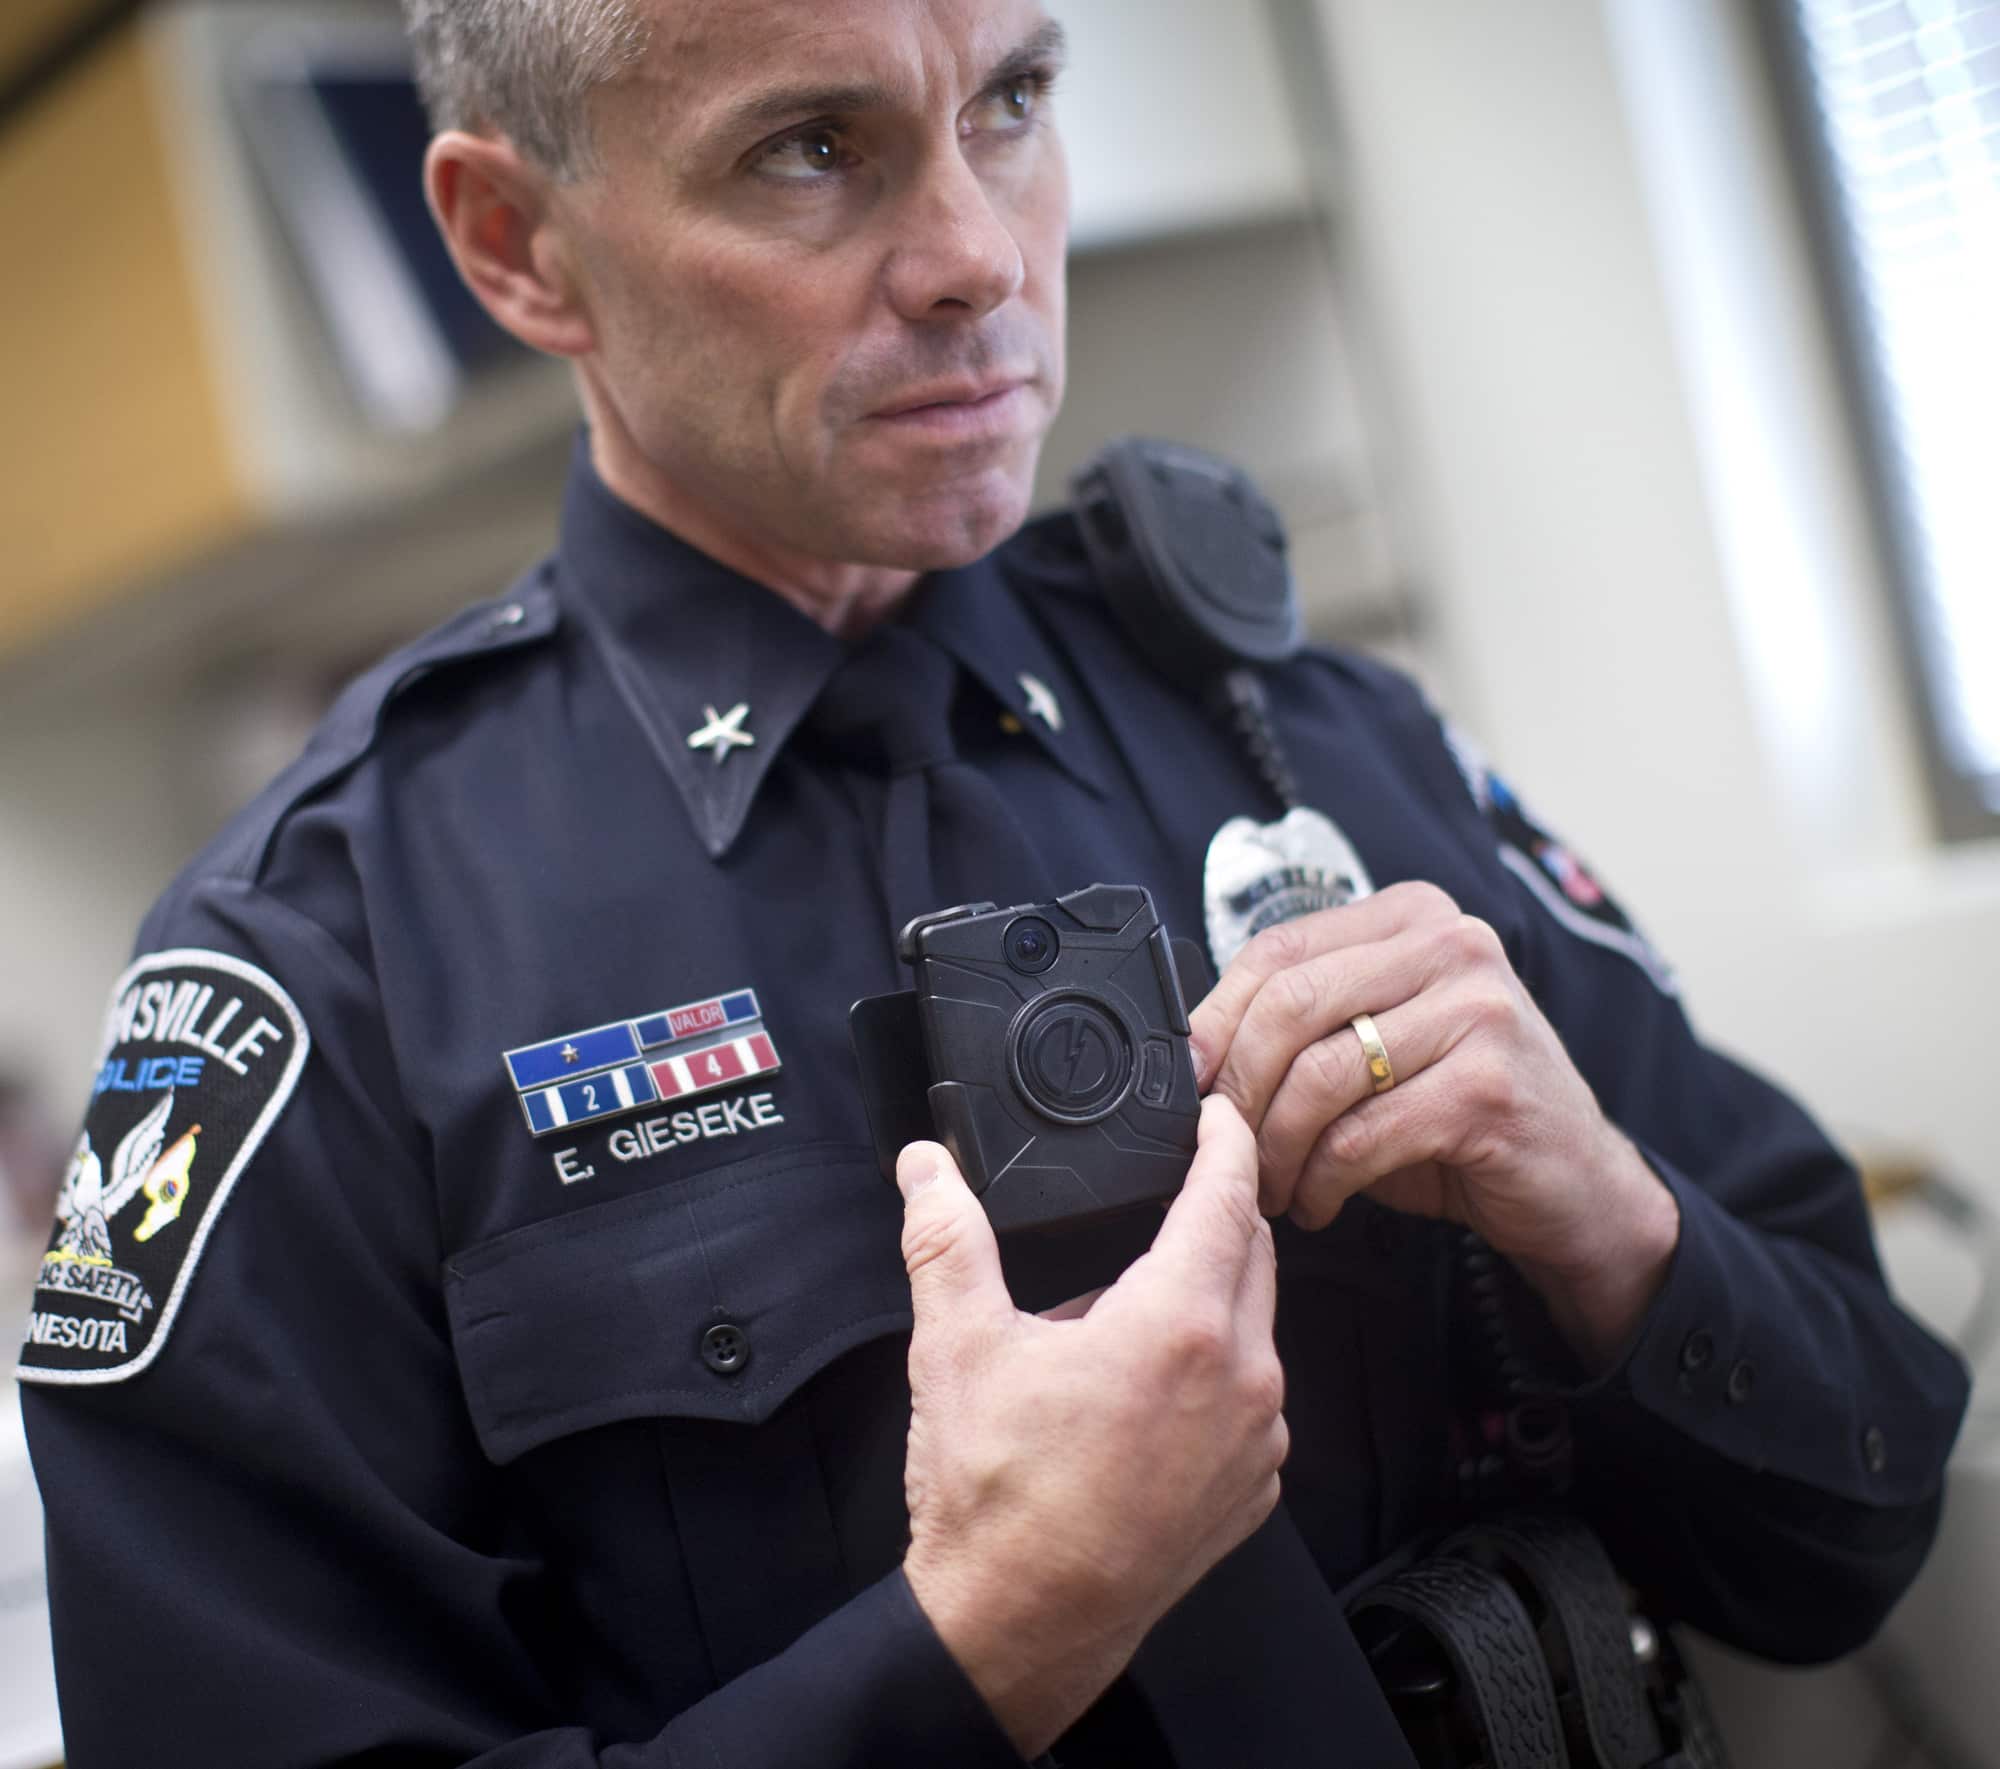 Police Body Camera Law on the Way? The White House Shows Full Support